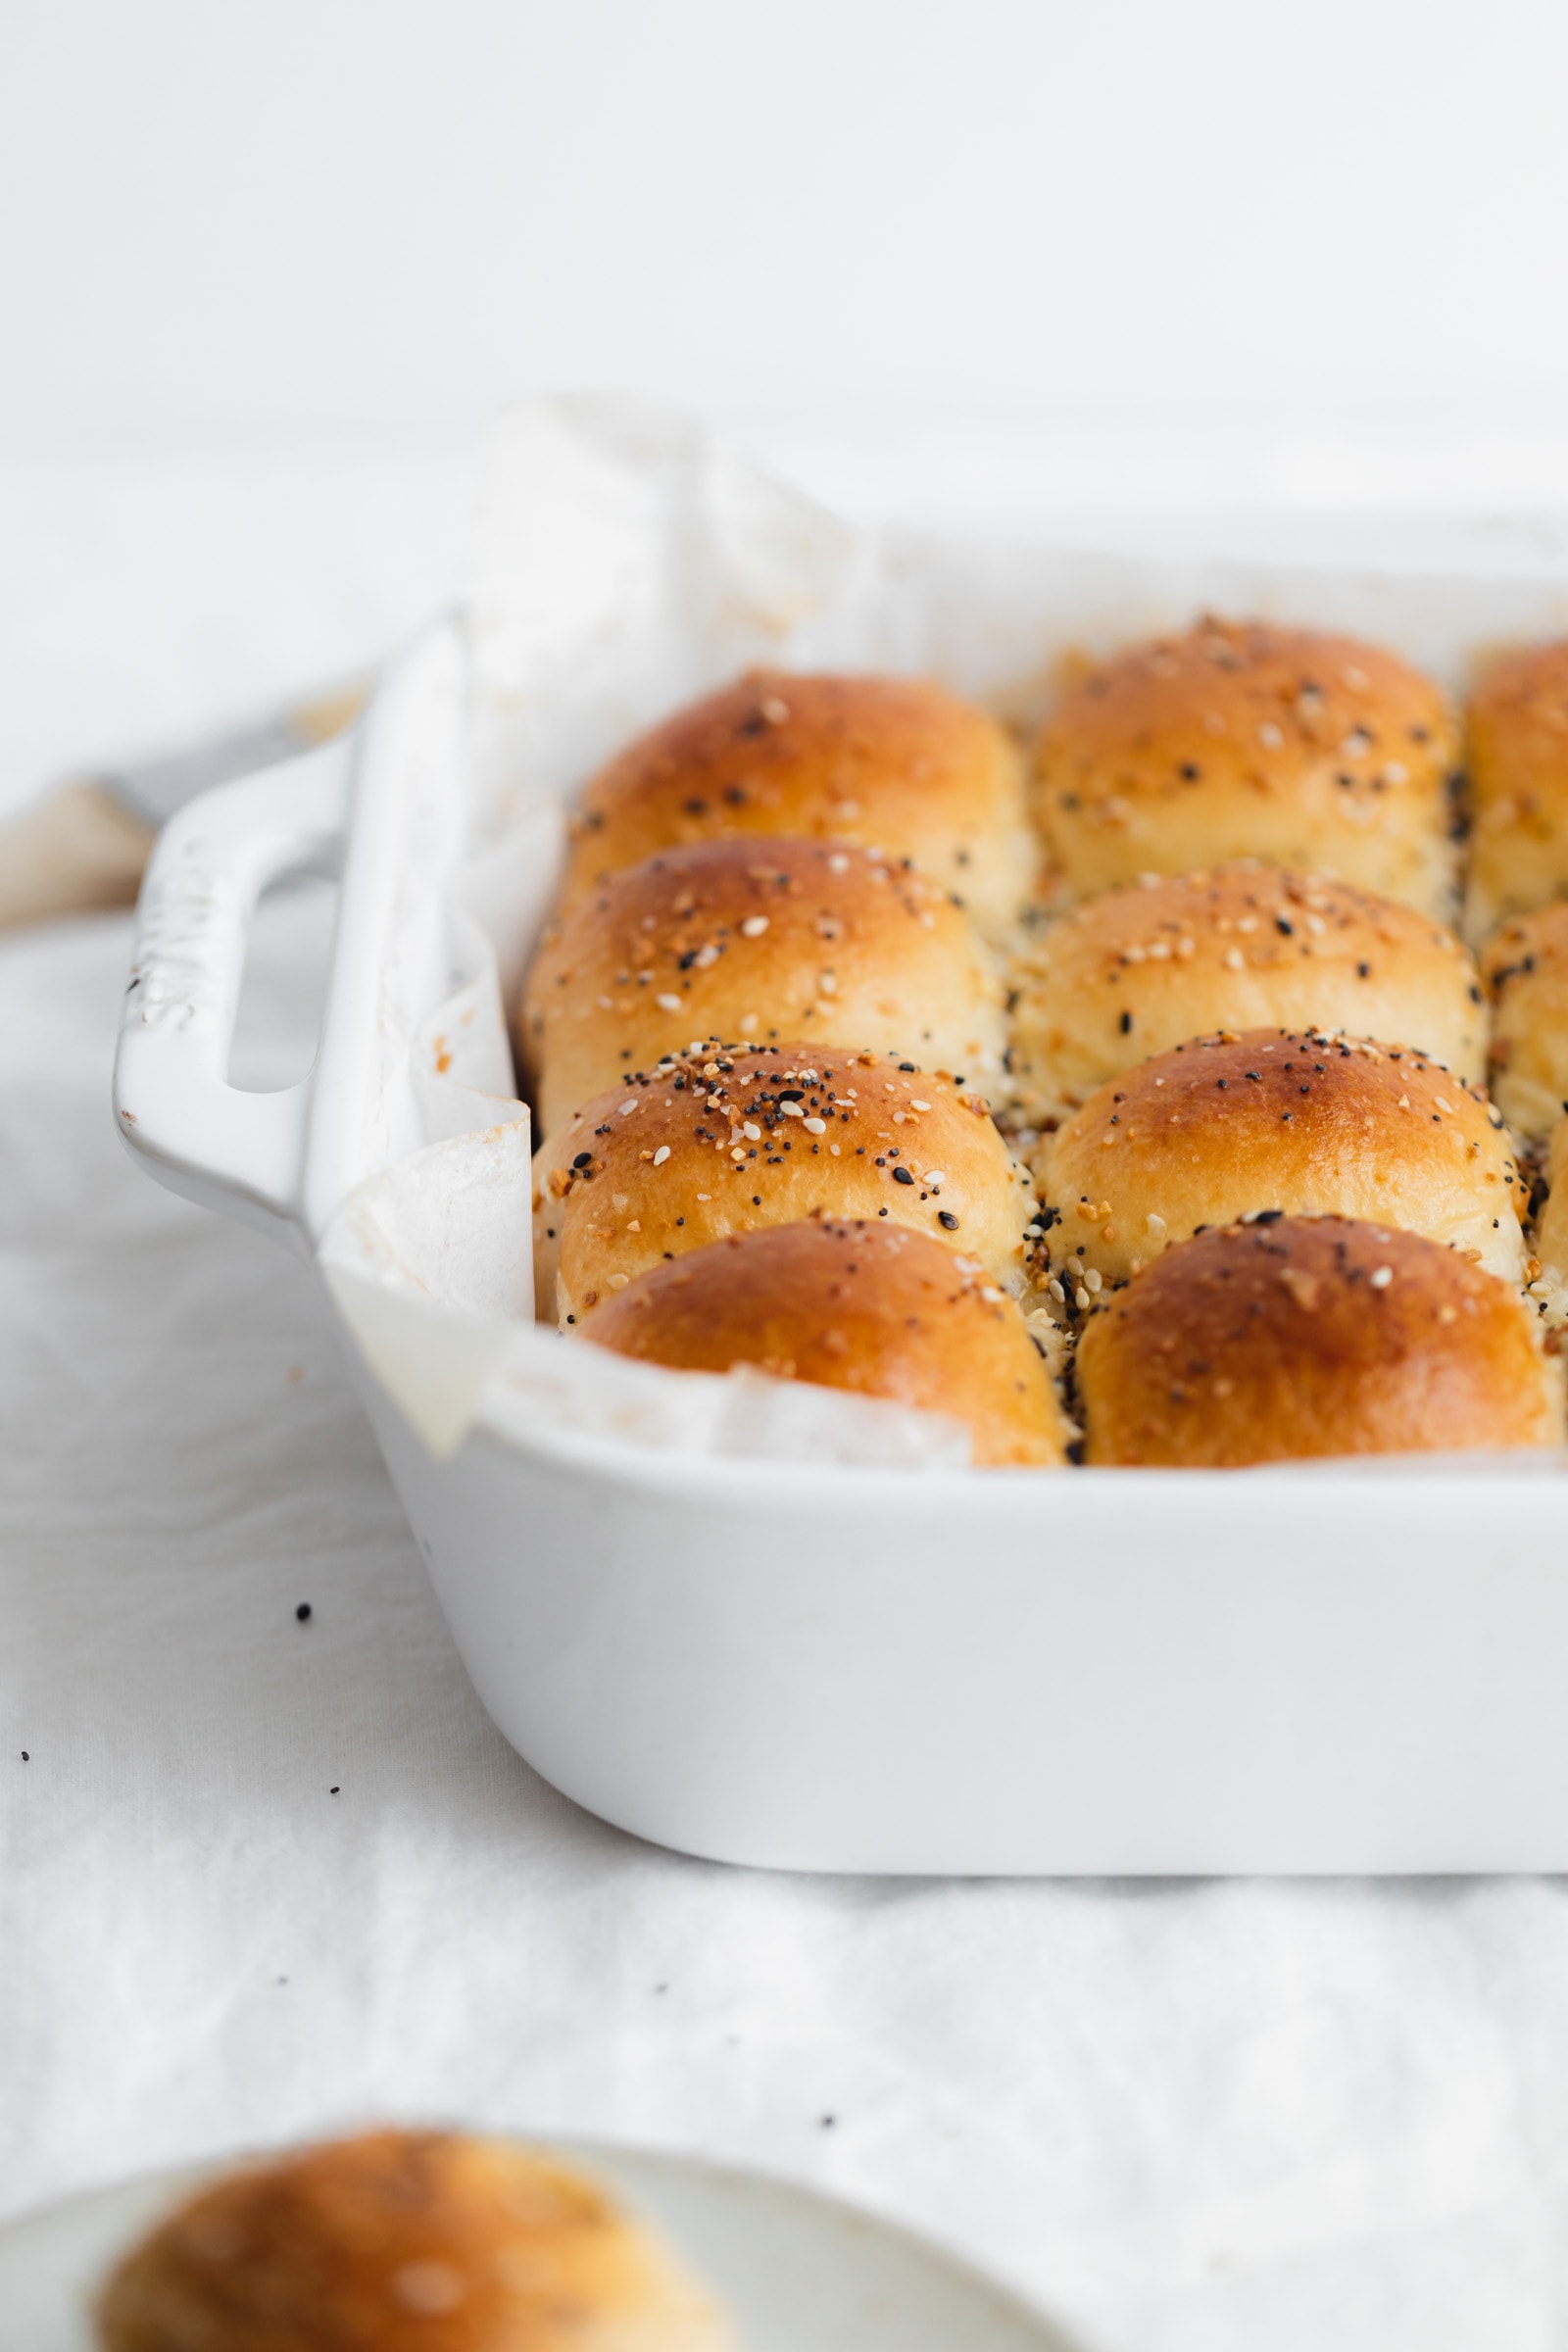 everything parker house rolls with seasoning on top